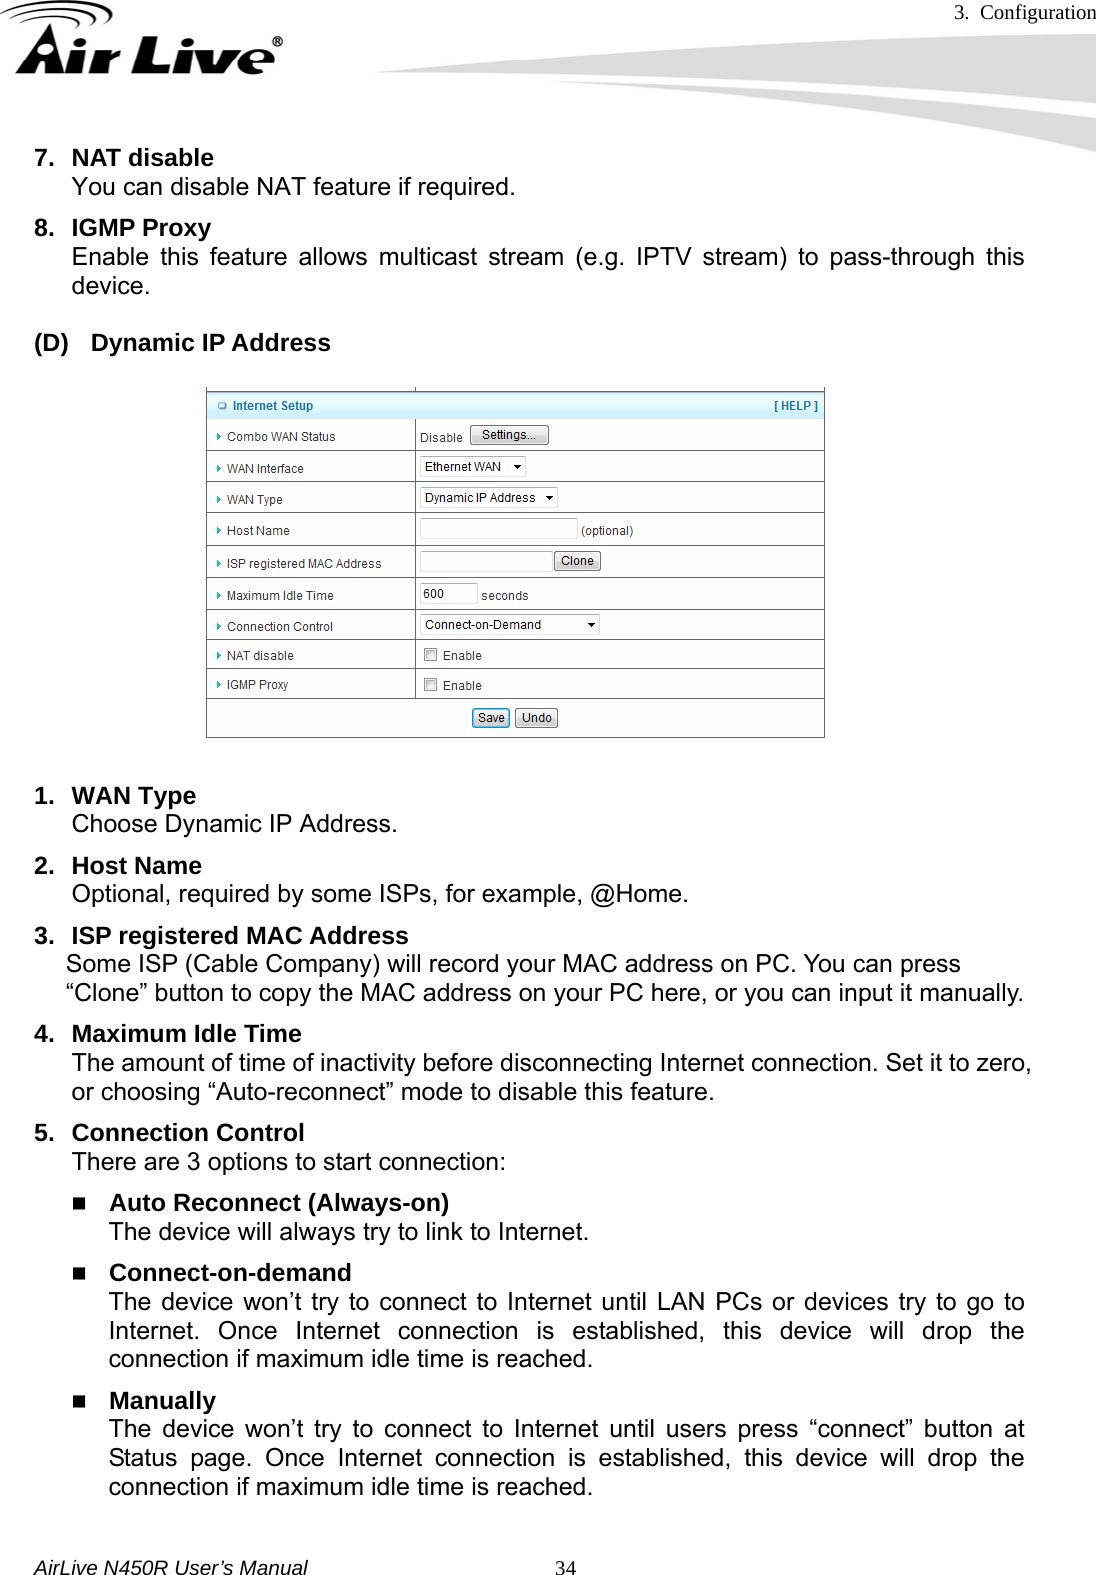 3. Configuration     AirLive N450R User’s Manual   347. NAT disable You can disable NAT feature if required. 8. IGMP Proxy Enable this feature allows multicast stream (e.g. IPTV stream) to pass-through this device.  (D) Dynamic IP Address   1. WAN Type Choose Dynamic IP Address. 2. Host Name Optional, required by some ISPs, for example, @Home. 3.  ISP registered MAC Address Some ISP (Cable Company) will record your MAC address on PC. You can press   “Clone” button to copy the MAC address on your PC here, or you can input it manually. 4. Maximum Idle Time The amount of time of inactivity before disconnecting Internet connection. Set it to zero, or choosing “Auto-reconnect” mode to disable this feature.   5. Connection Control There are 3 options to start connection:    Auto Reconnect (Always-on) The device will always try to link to Internet.      Connect-on-demand The device won’t try to connect to Internet until LAN PCs or devices try to go to Internet. Once Internet connection is established, this device will drop the connection if maximum idle time is reached.  Manually The device won’t try to connect to Internet until users press “connect” button at Status page. Once Internet connection is established, this device will drop the connection if maximum idle time is reached.  